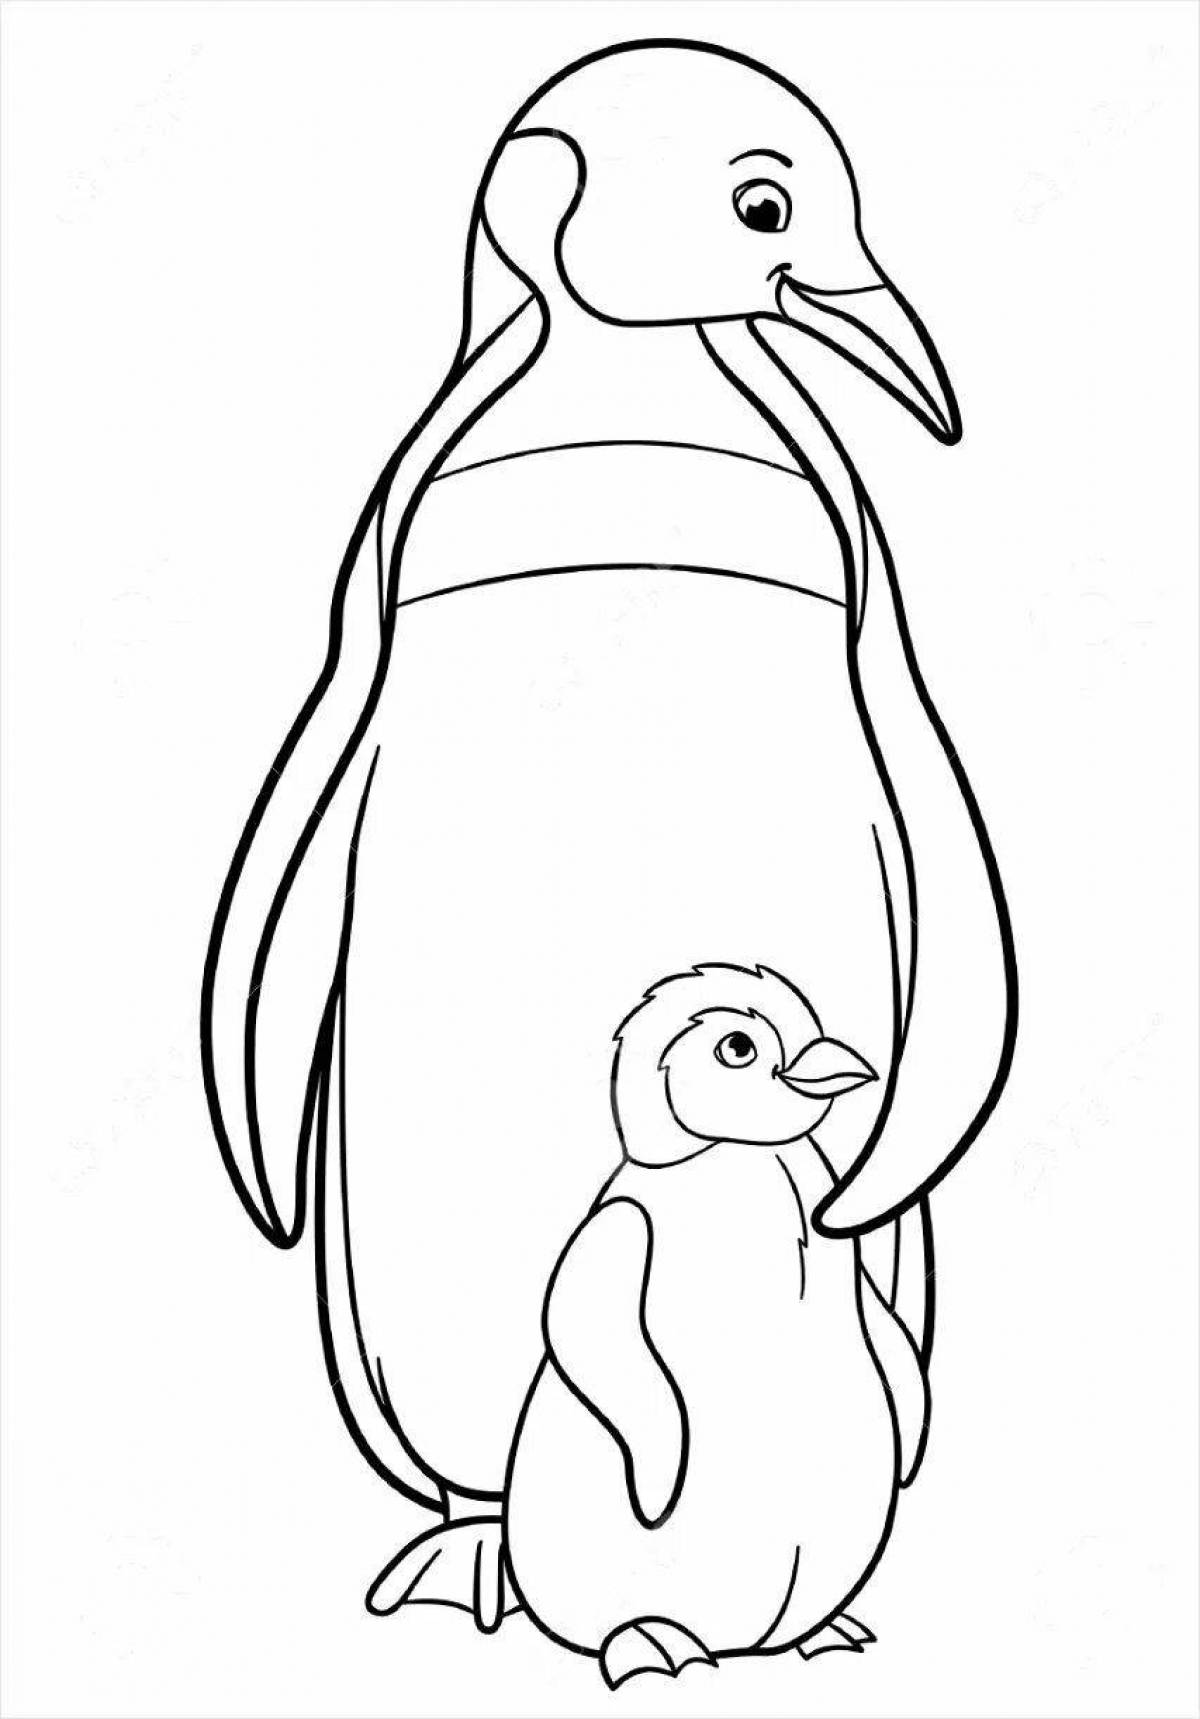 Gorgeous emperor penguin coloring page